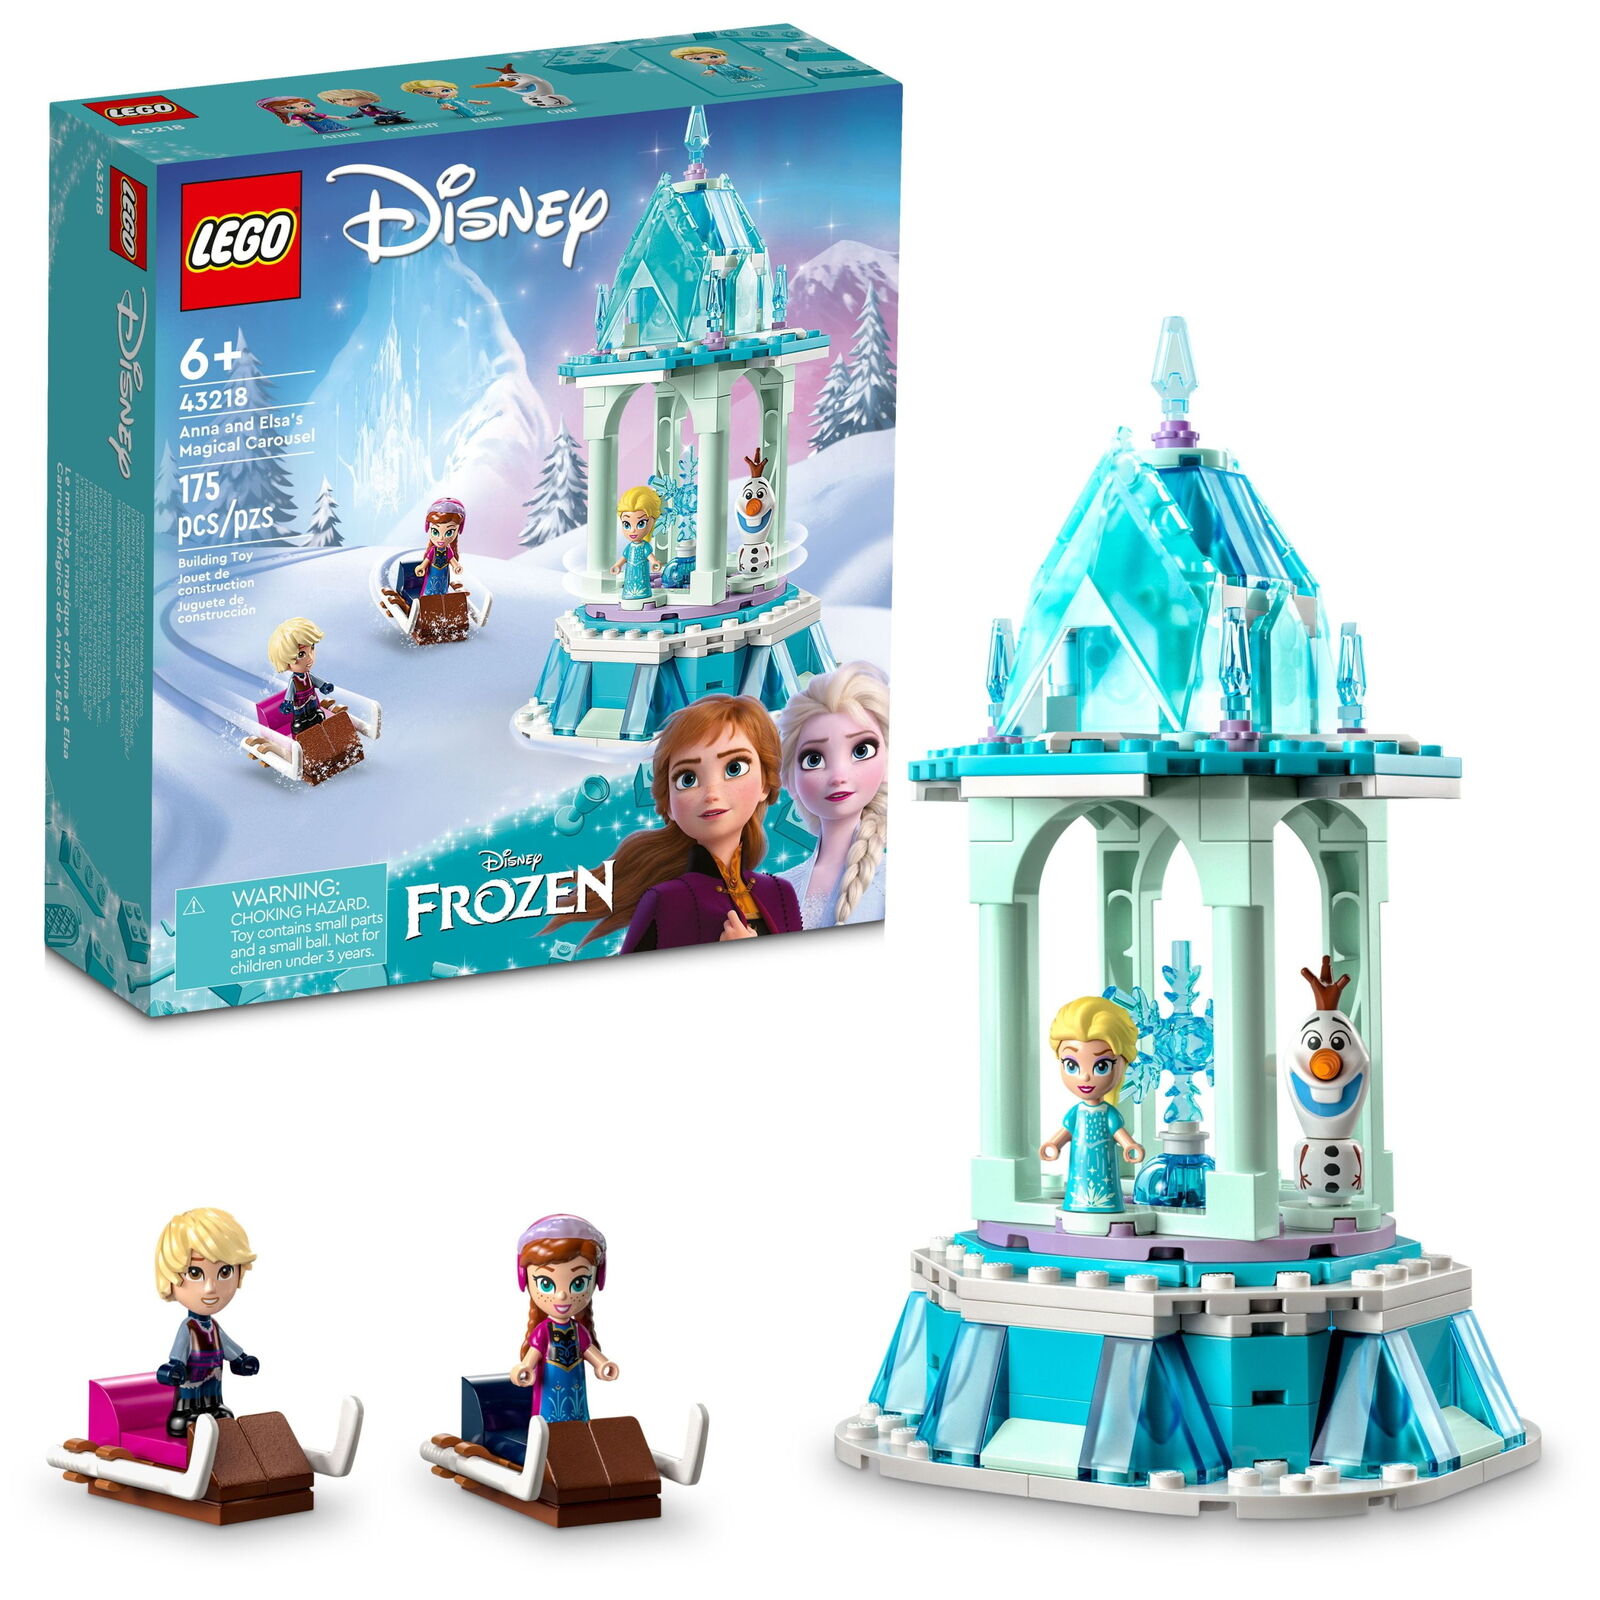 LEGO Disney Frozen Anna and Elsa’s Magical Carousel 43218 Ice Palace Building T